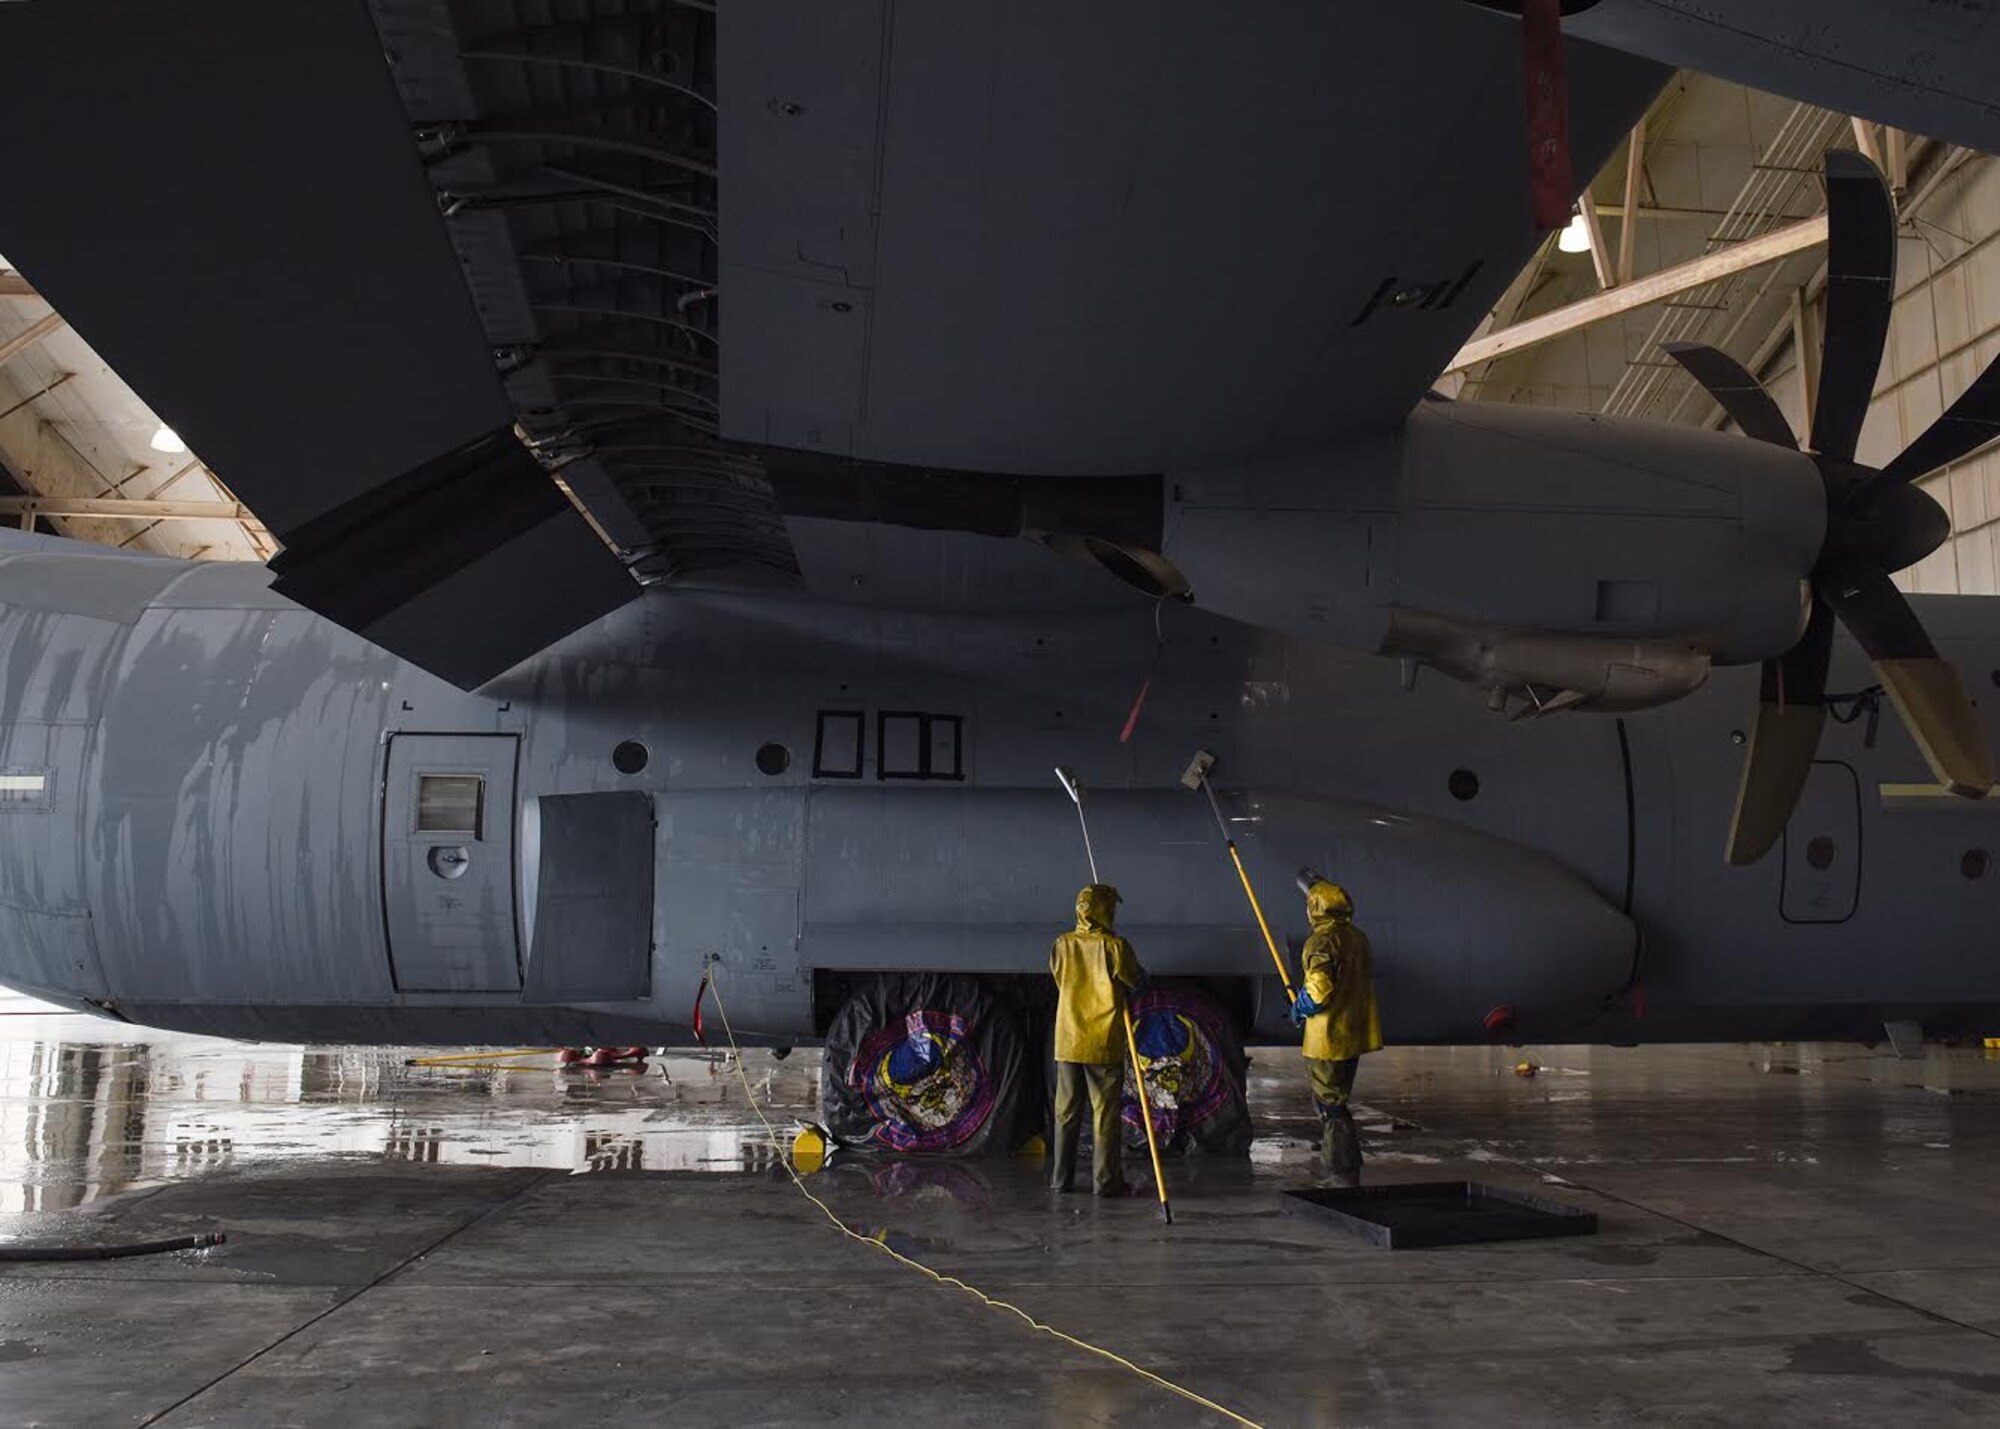 Photo shows two Airmen, dressed in yellow protective gear, washing the side of a C-130J Super Hercules aircrfat.